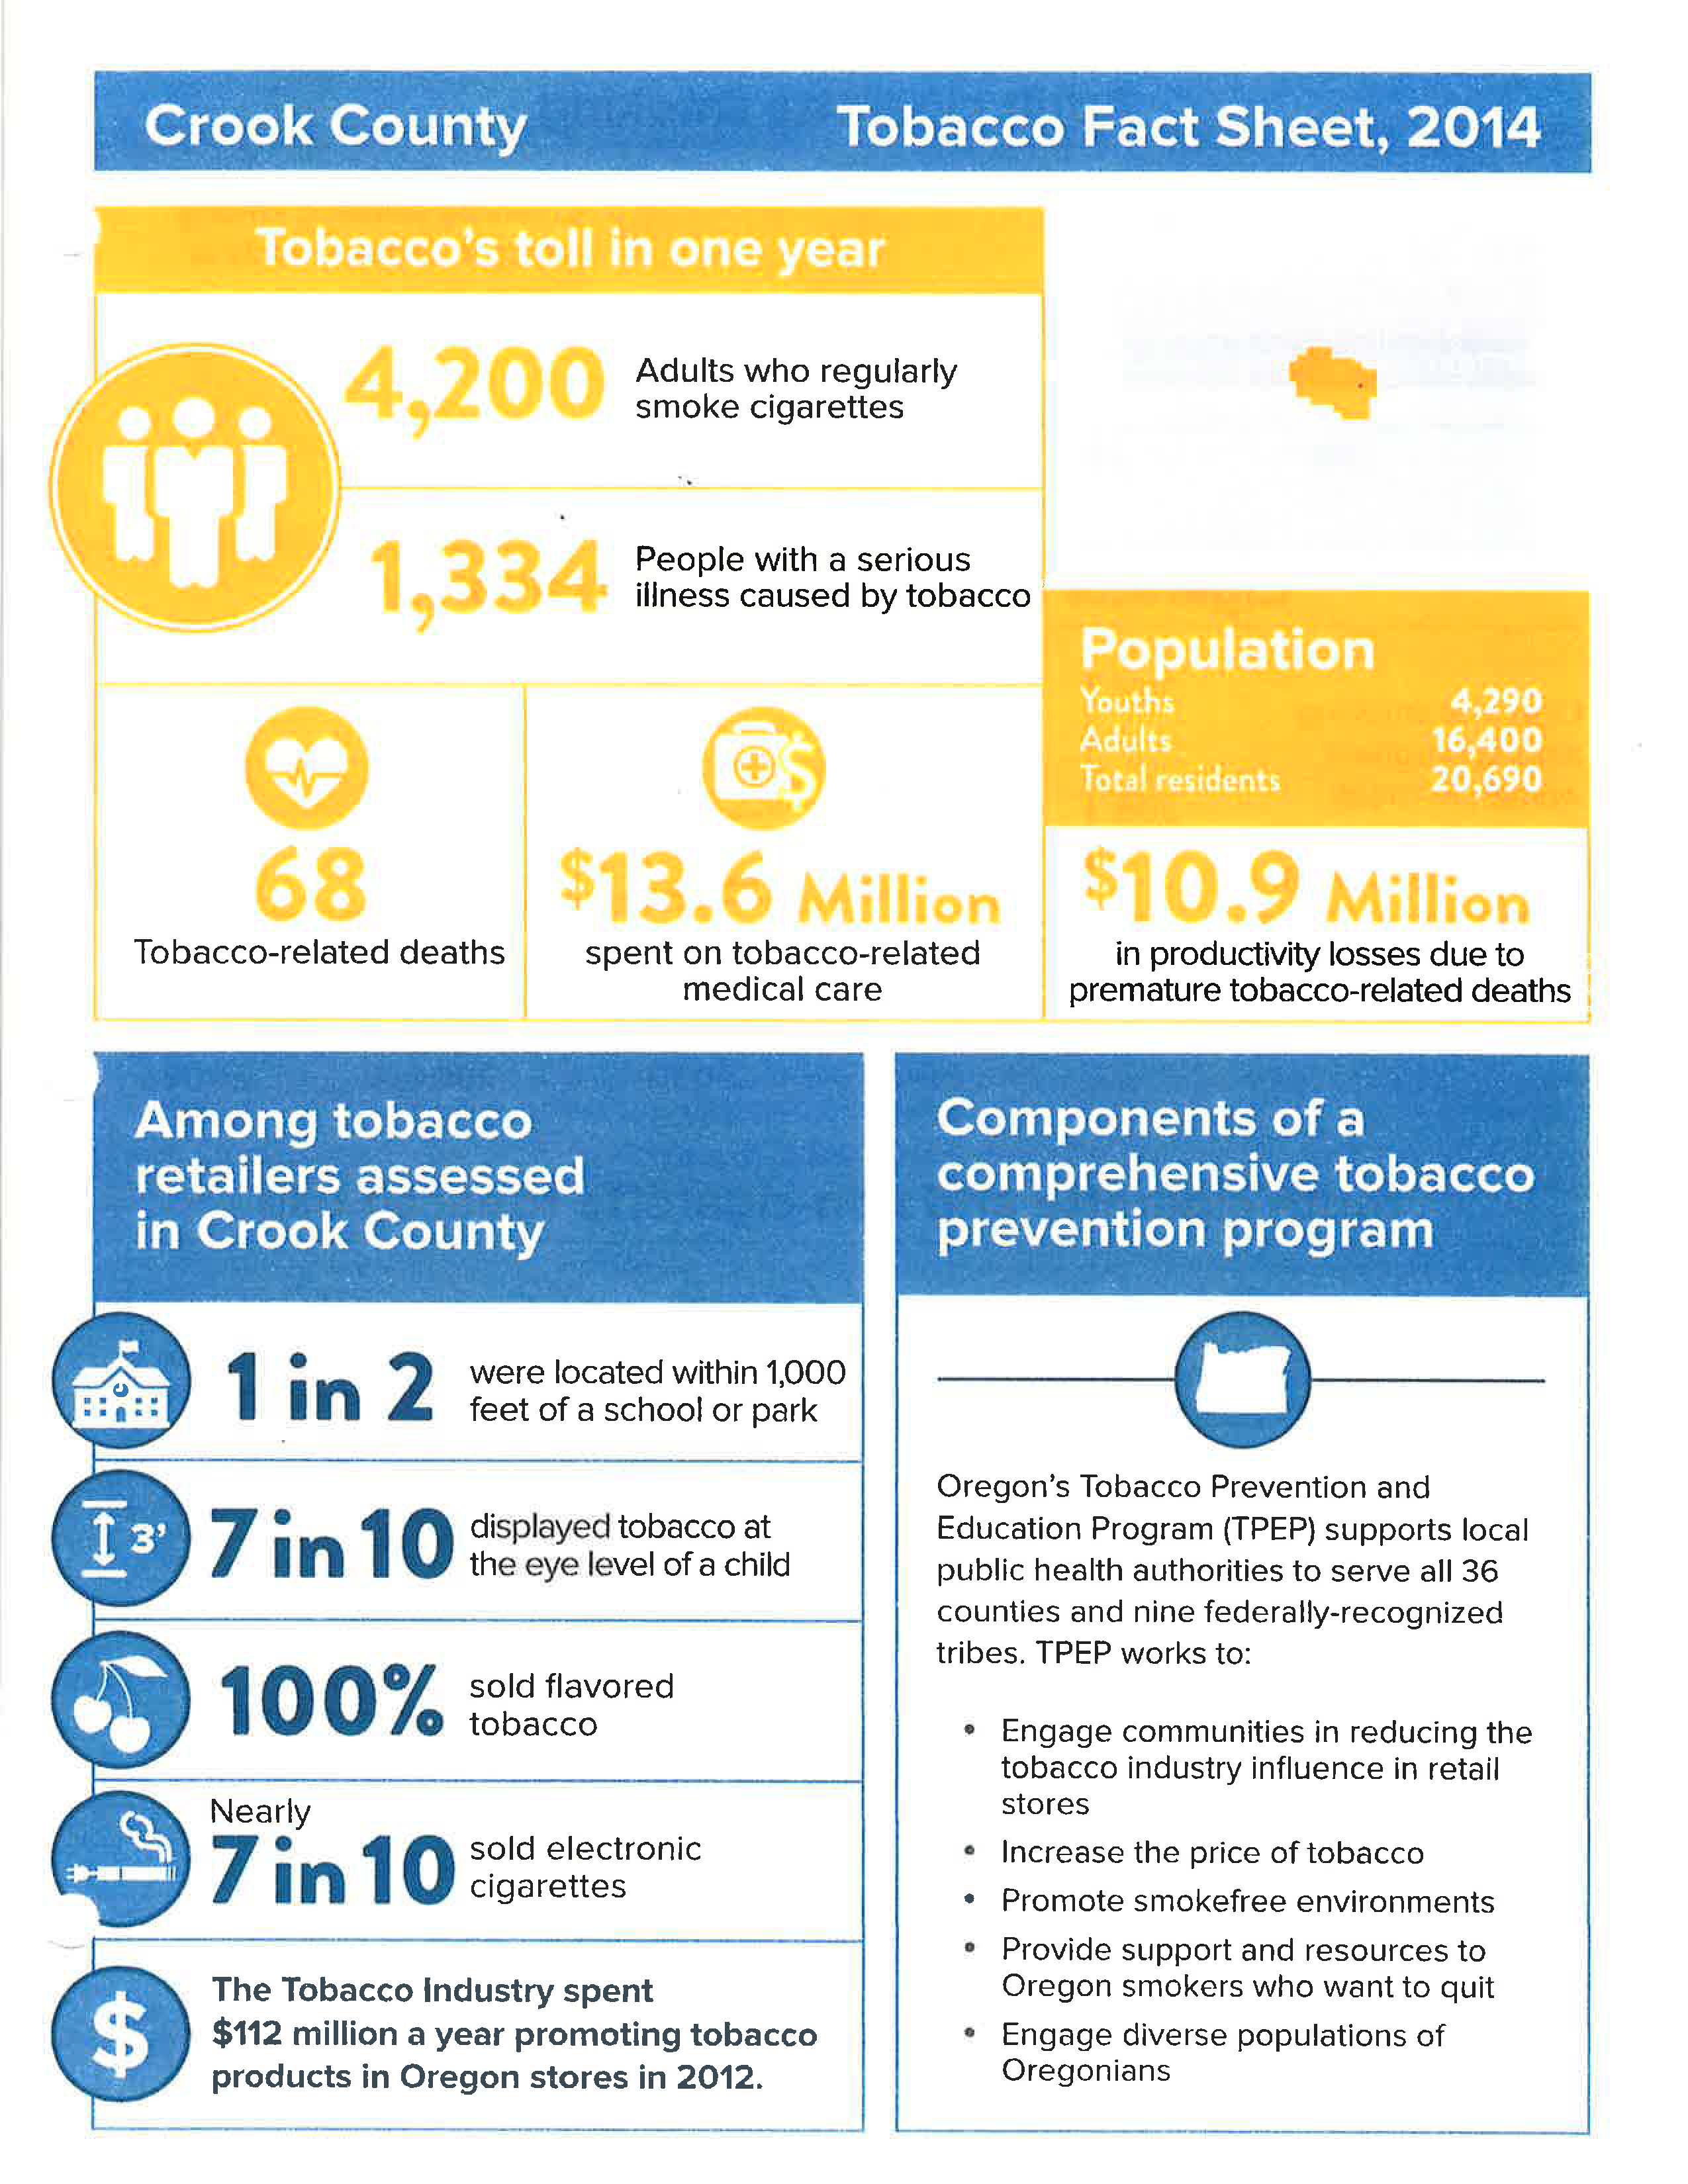 Tobacco cessation handout used to support the 2015-1 Crook County Health Department's 2015-1 grant.